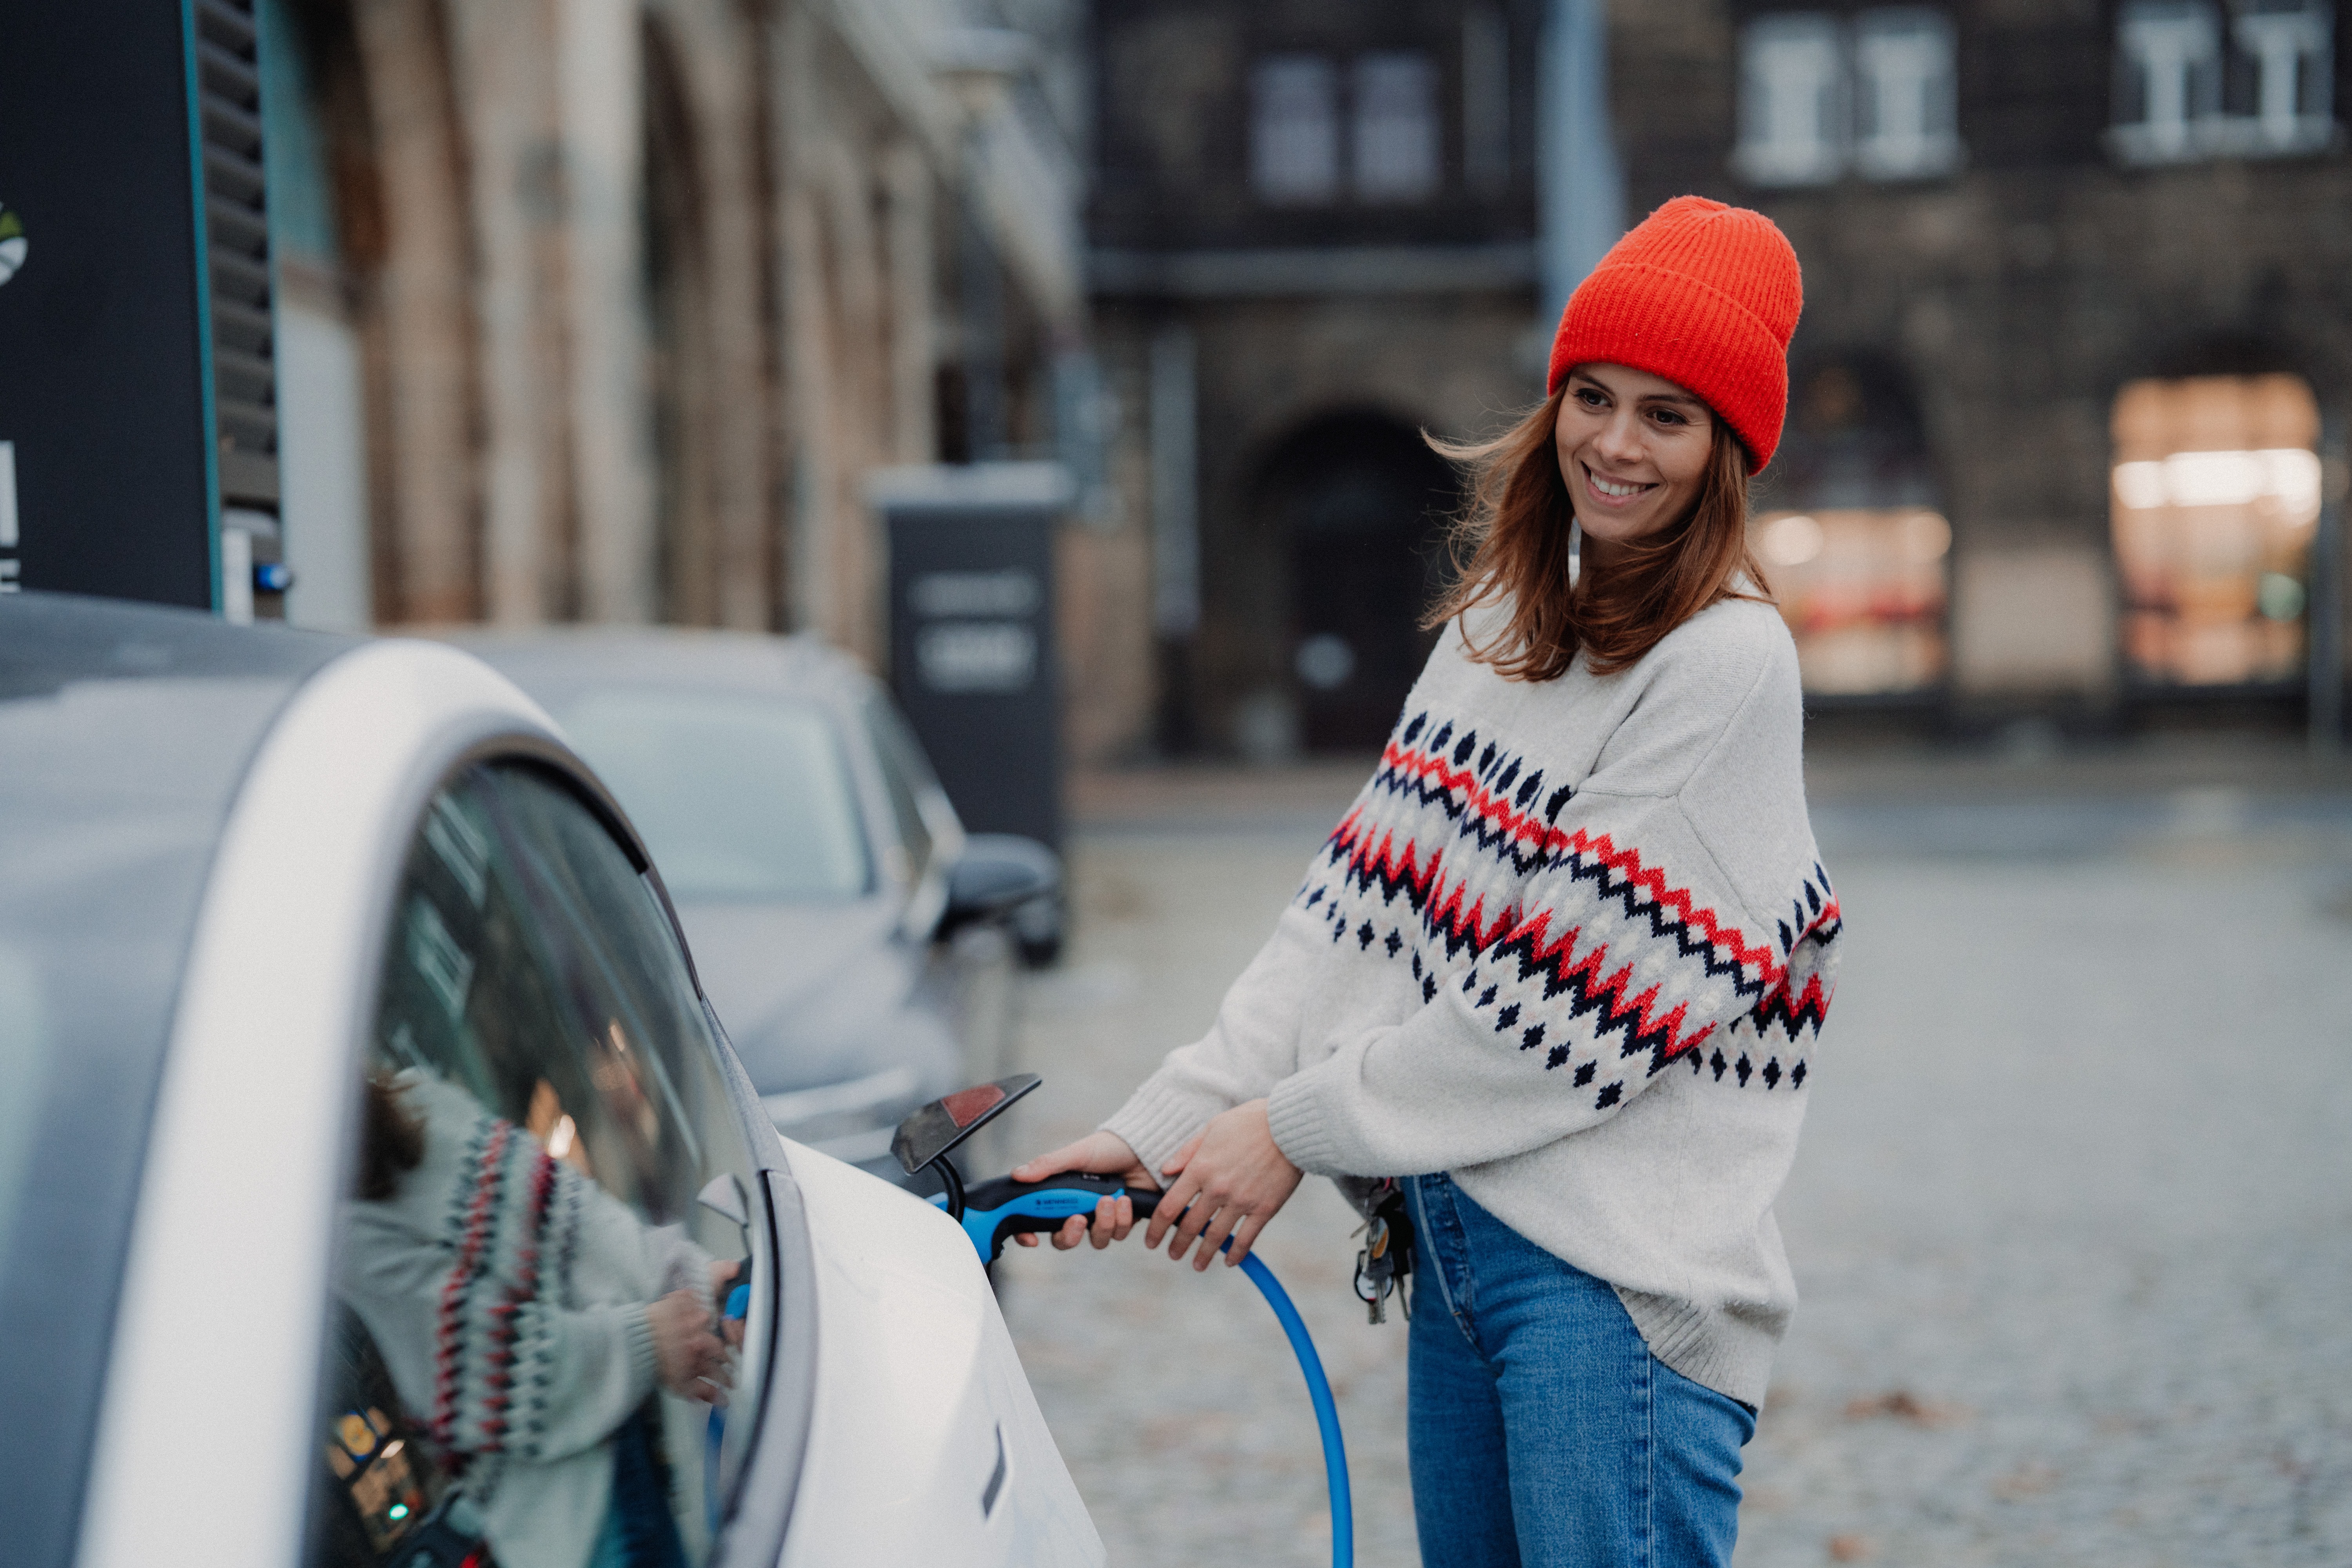 A young woman in a red hat charges her electric vehicle